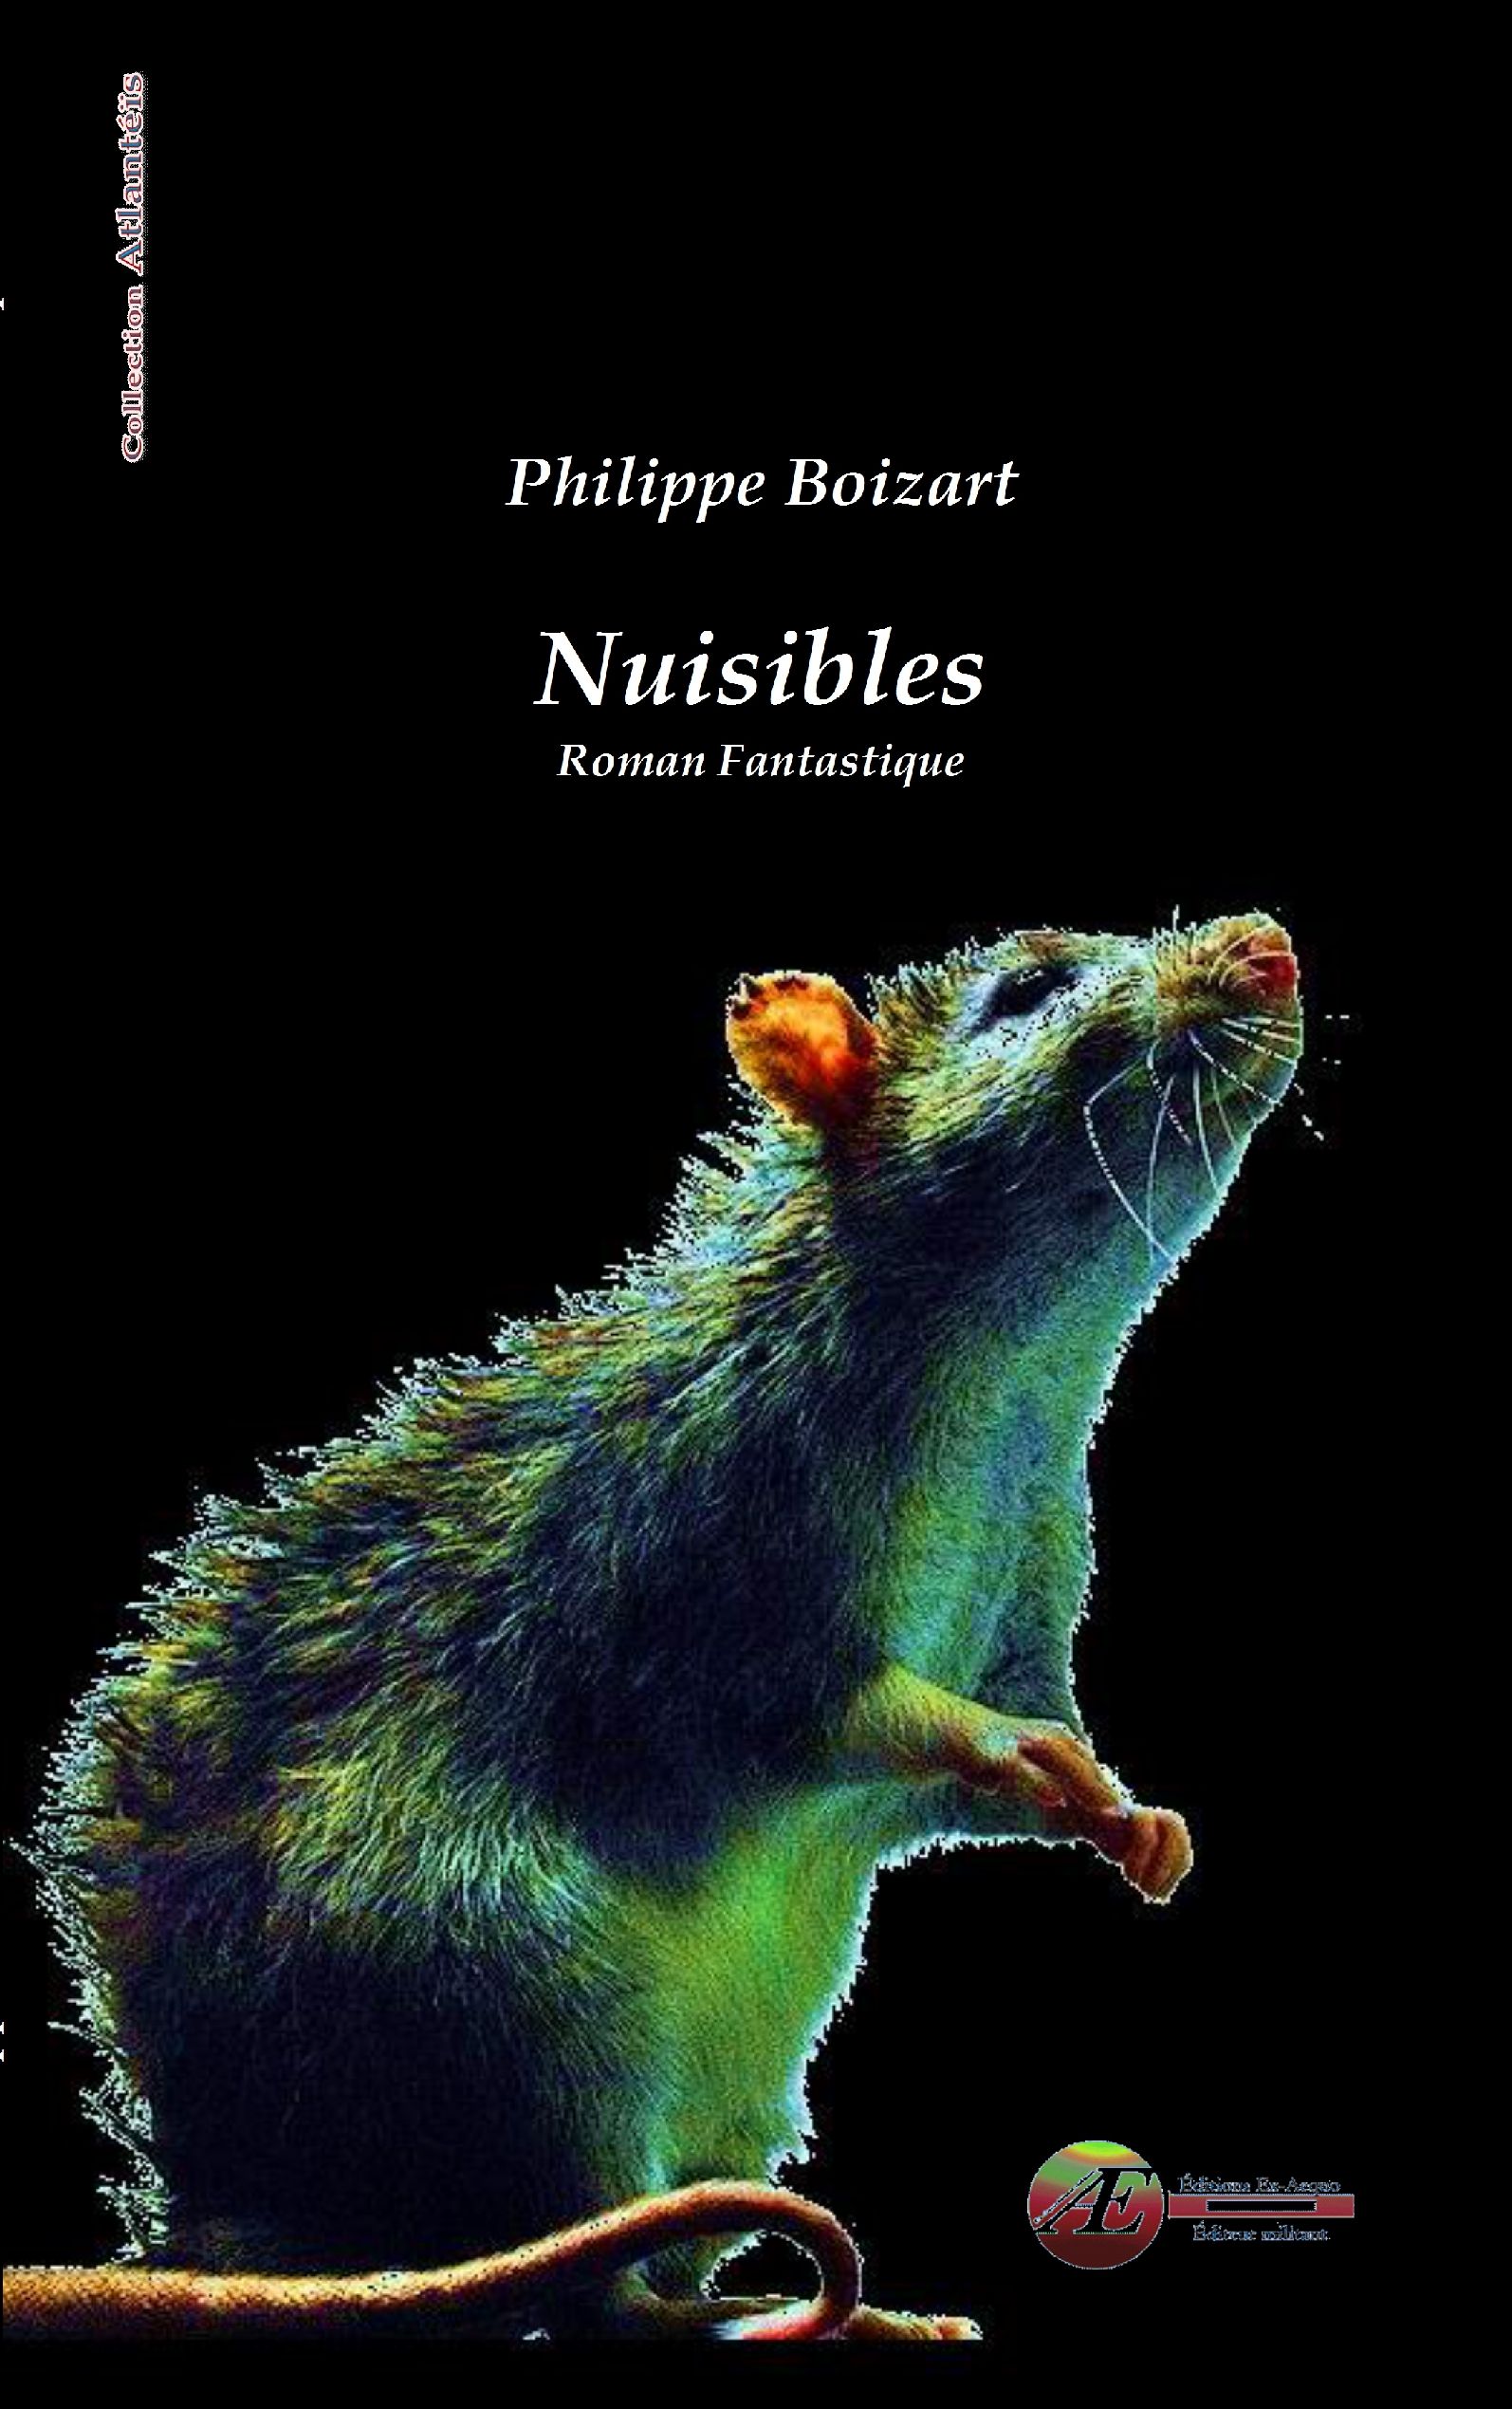 You are currently viewing Nuisibles, de Philippe Boizart